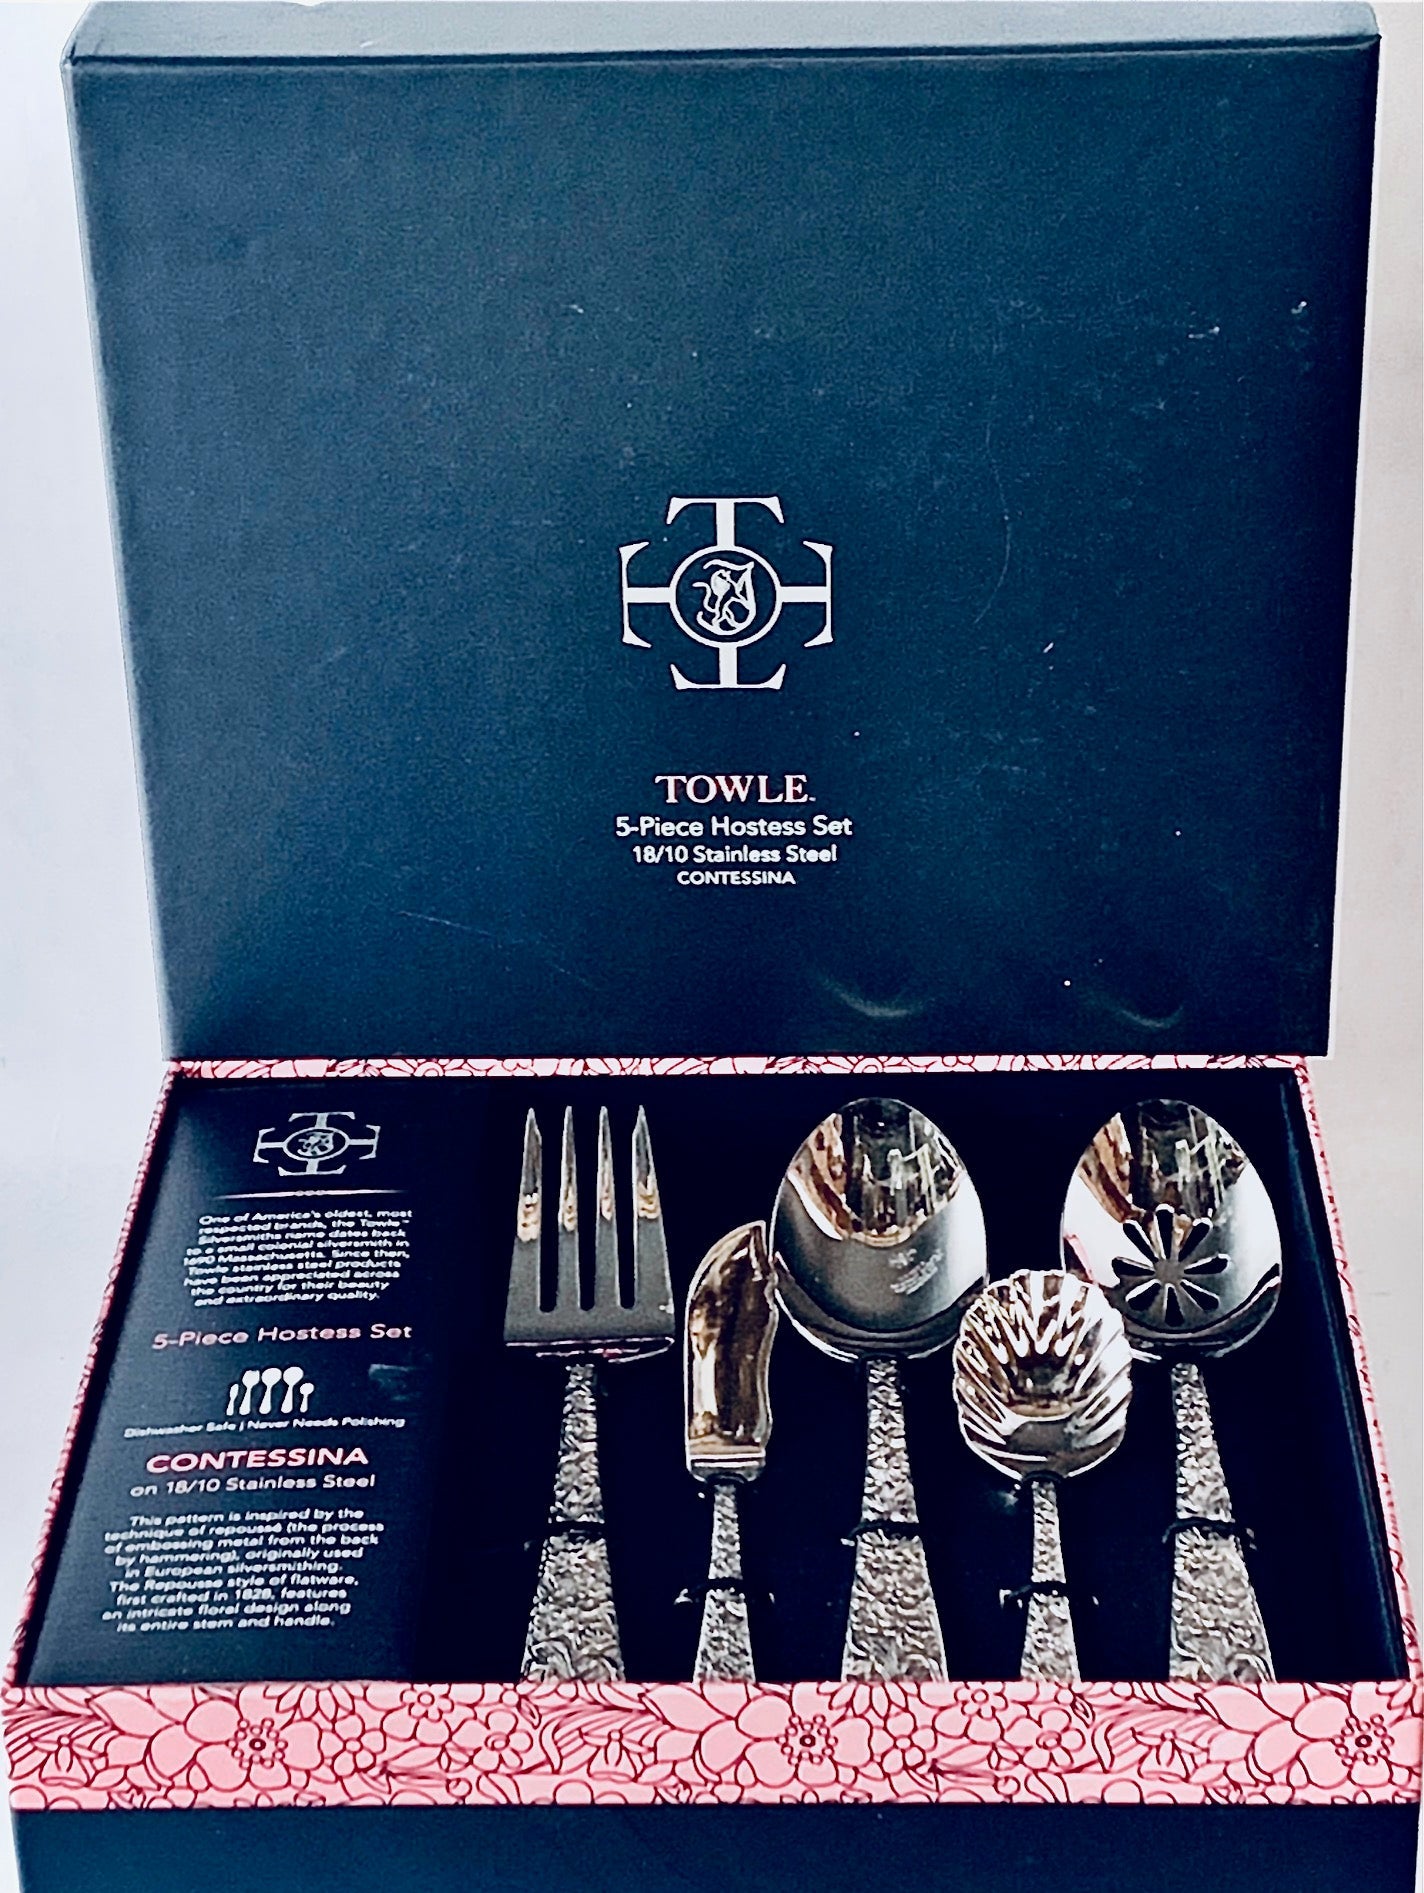 Towle Contessina 5 Pc Hostess Set 18/10 Stainless Steel - Royal Gift